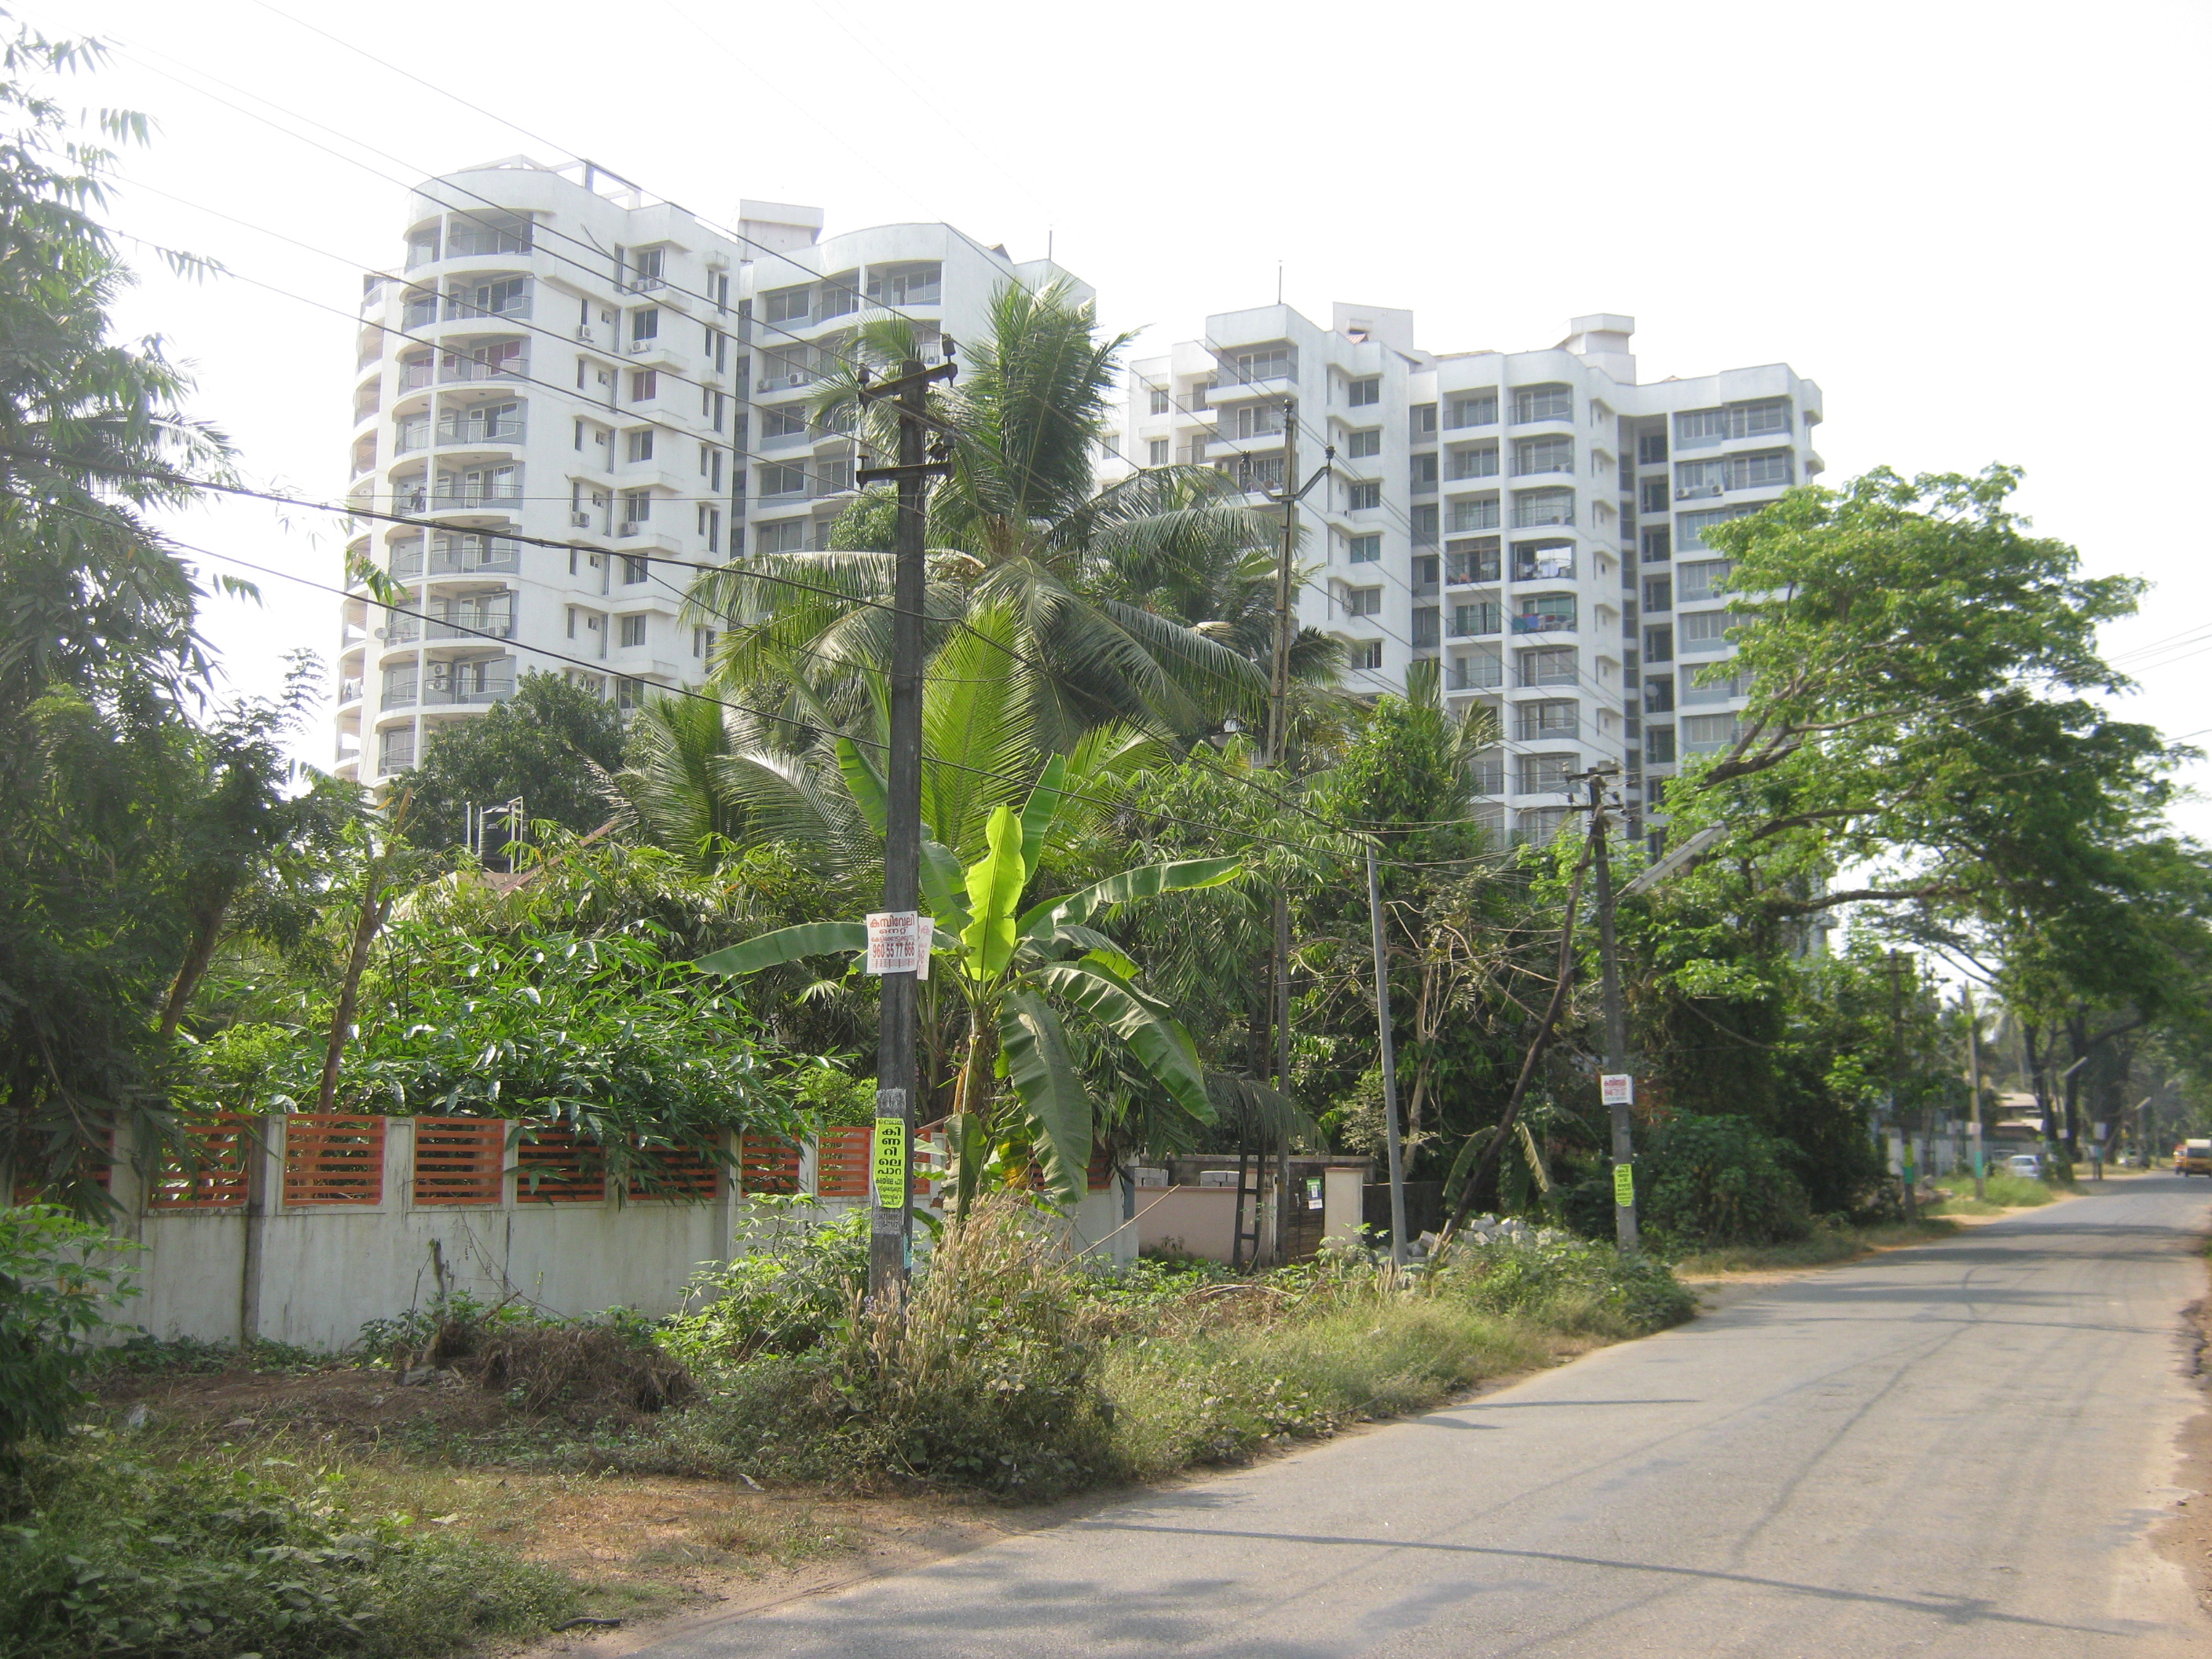 3 Bed Room Unfurnished Water Front Apartment For Sale  in Desom, near Kochi Airport